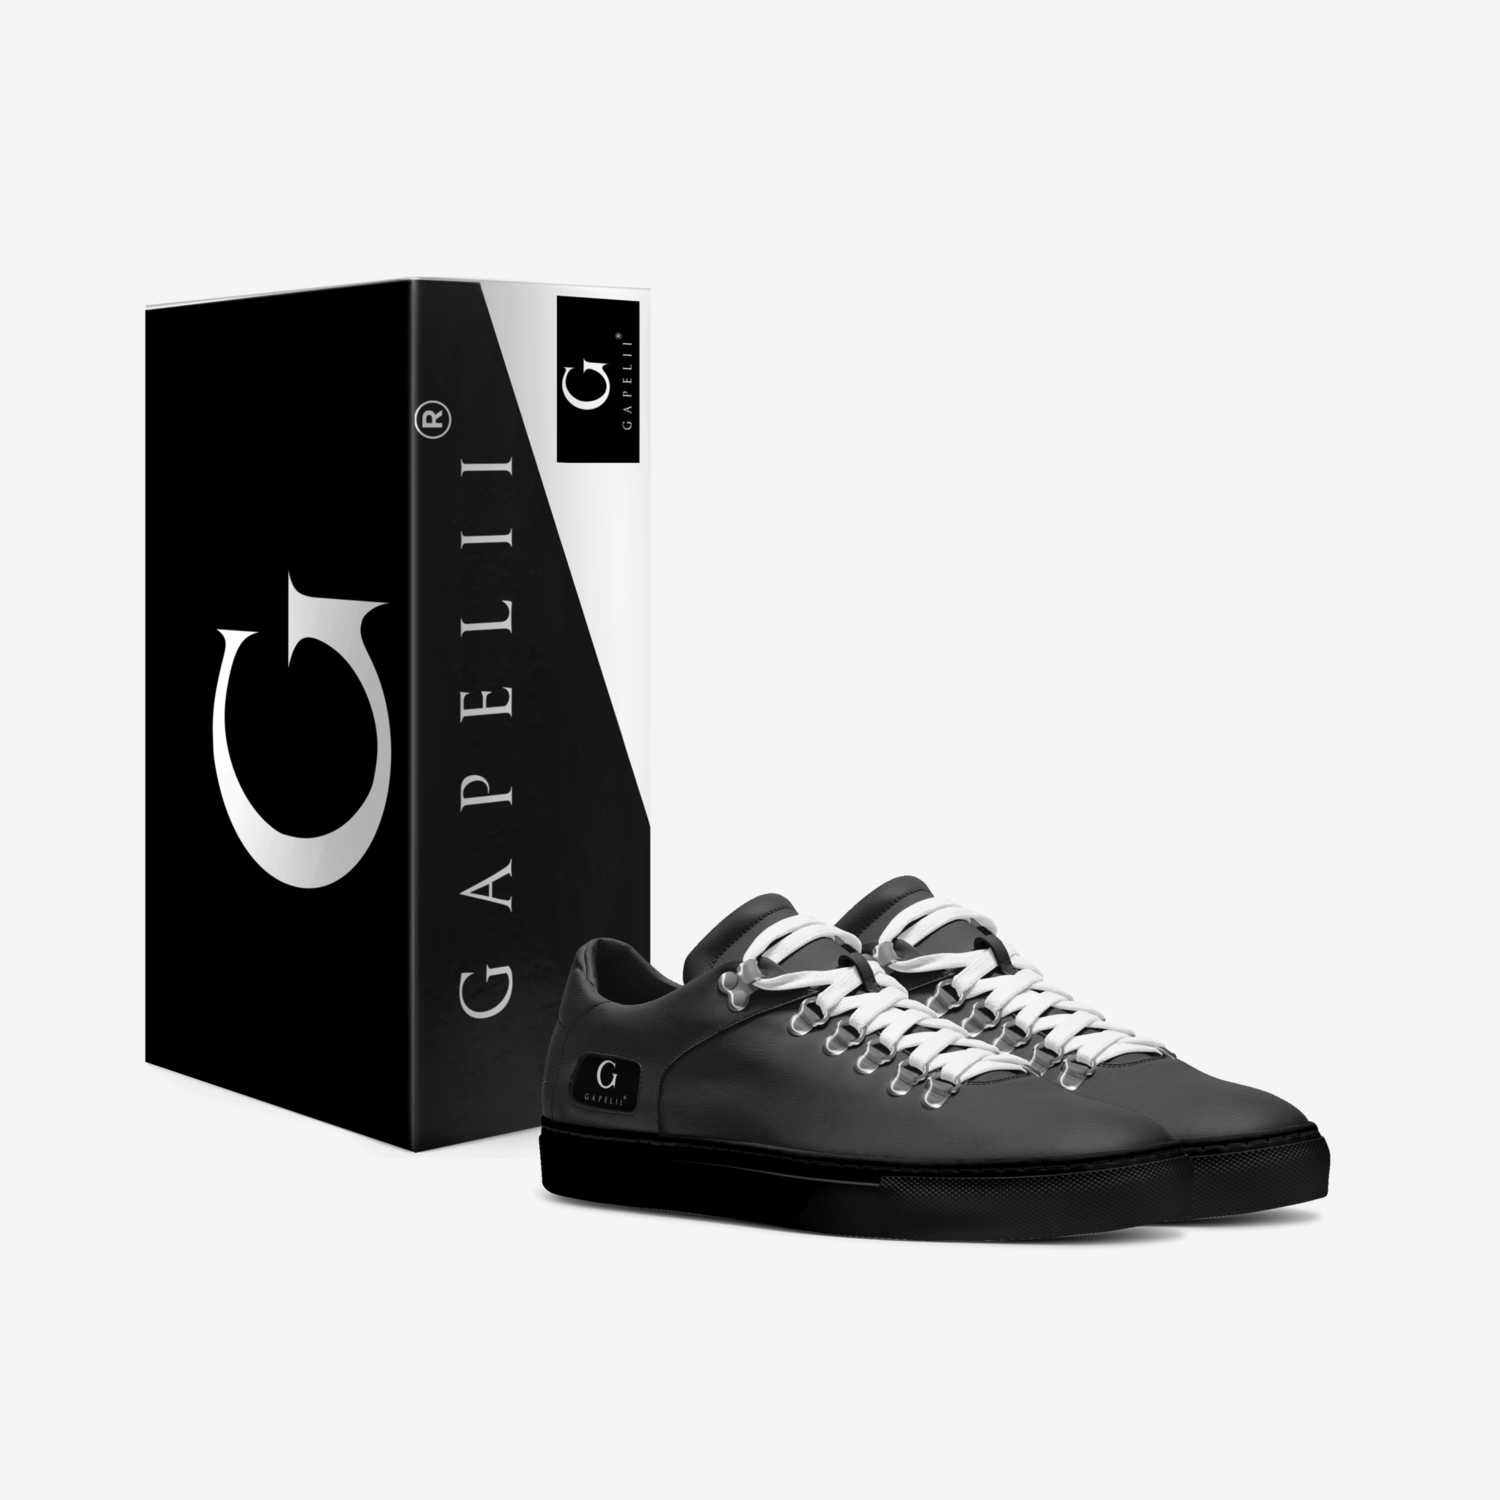 Gapelii G2 BLK custom made in Italy shoes by Toja Hodge | Box view